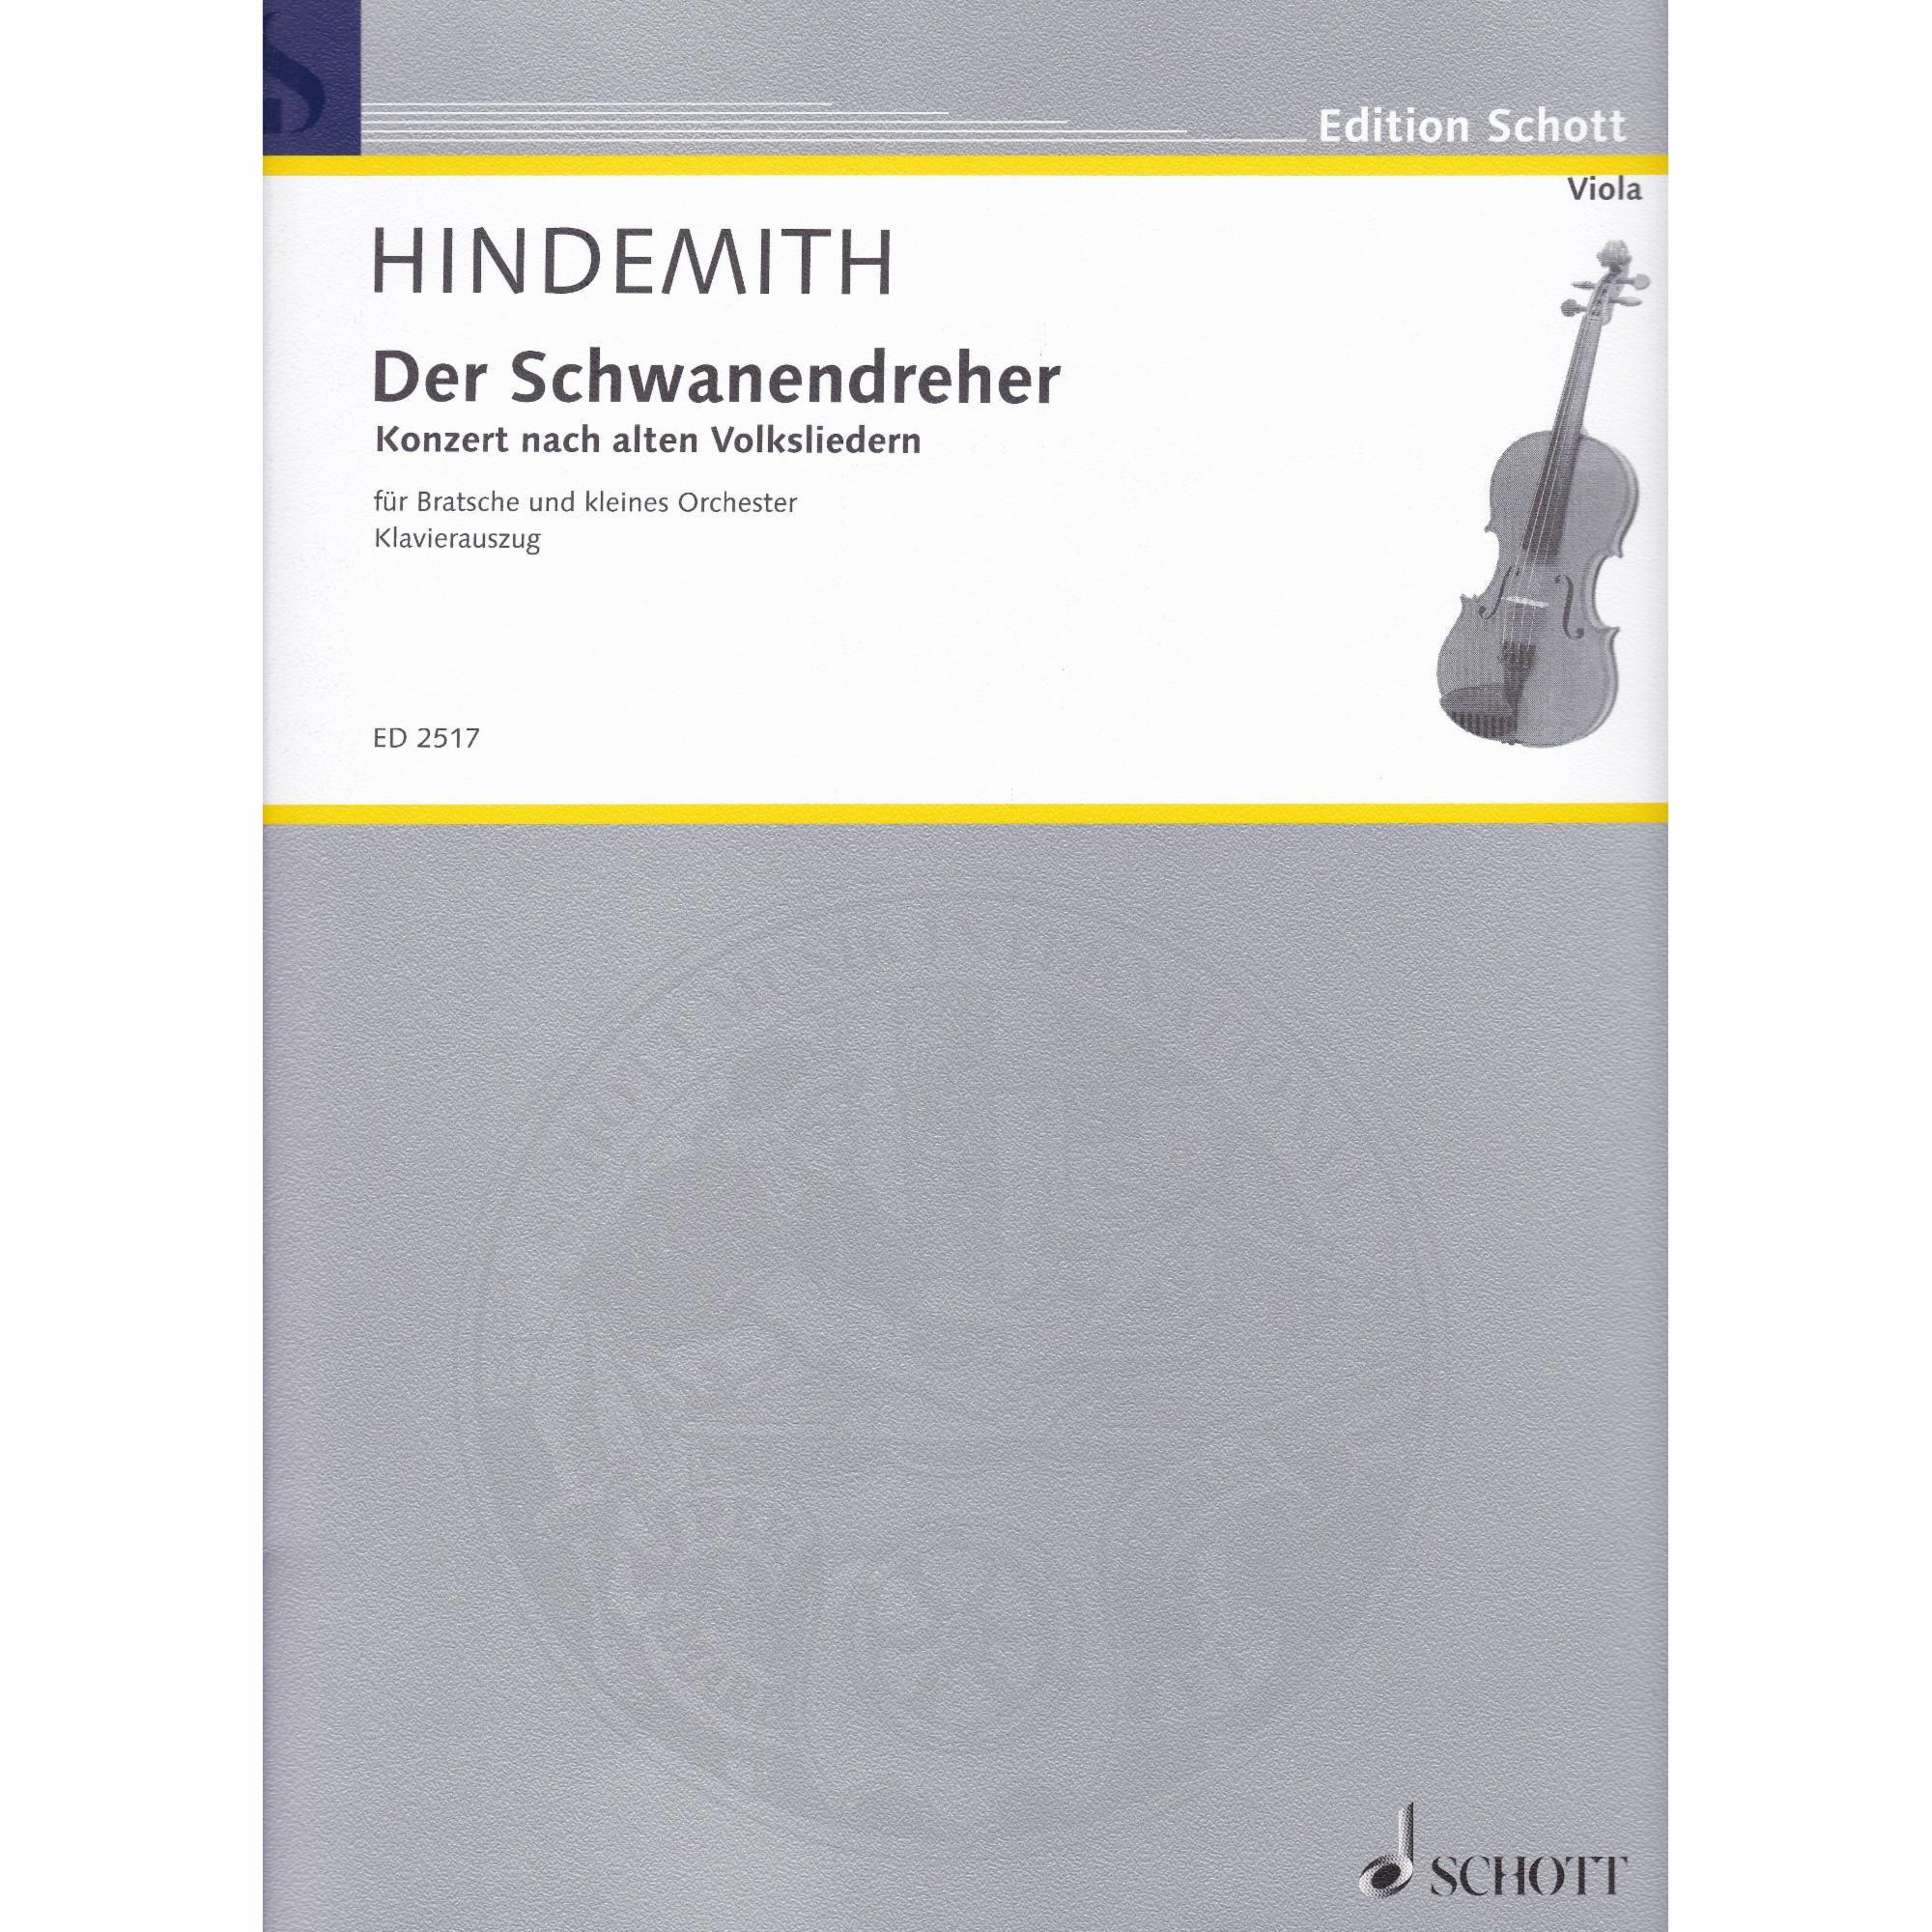 Der Schwanendreher for Viola and Piano